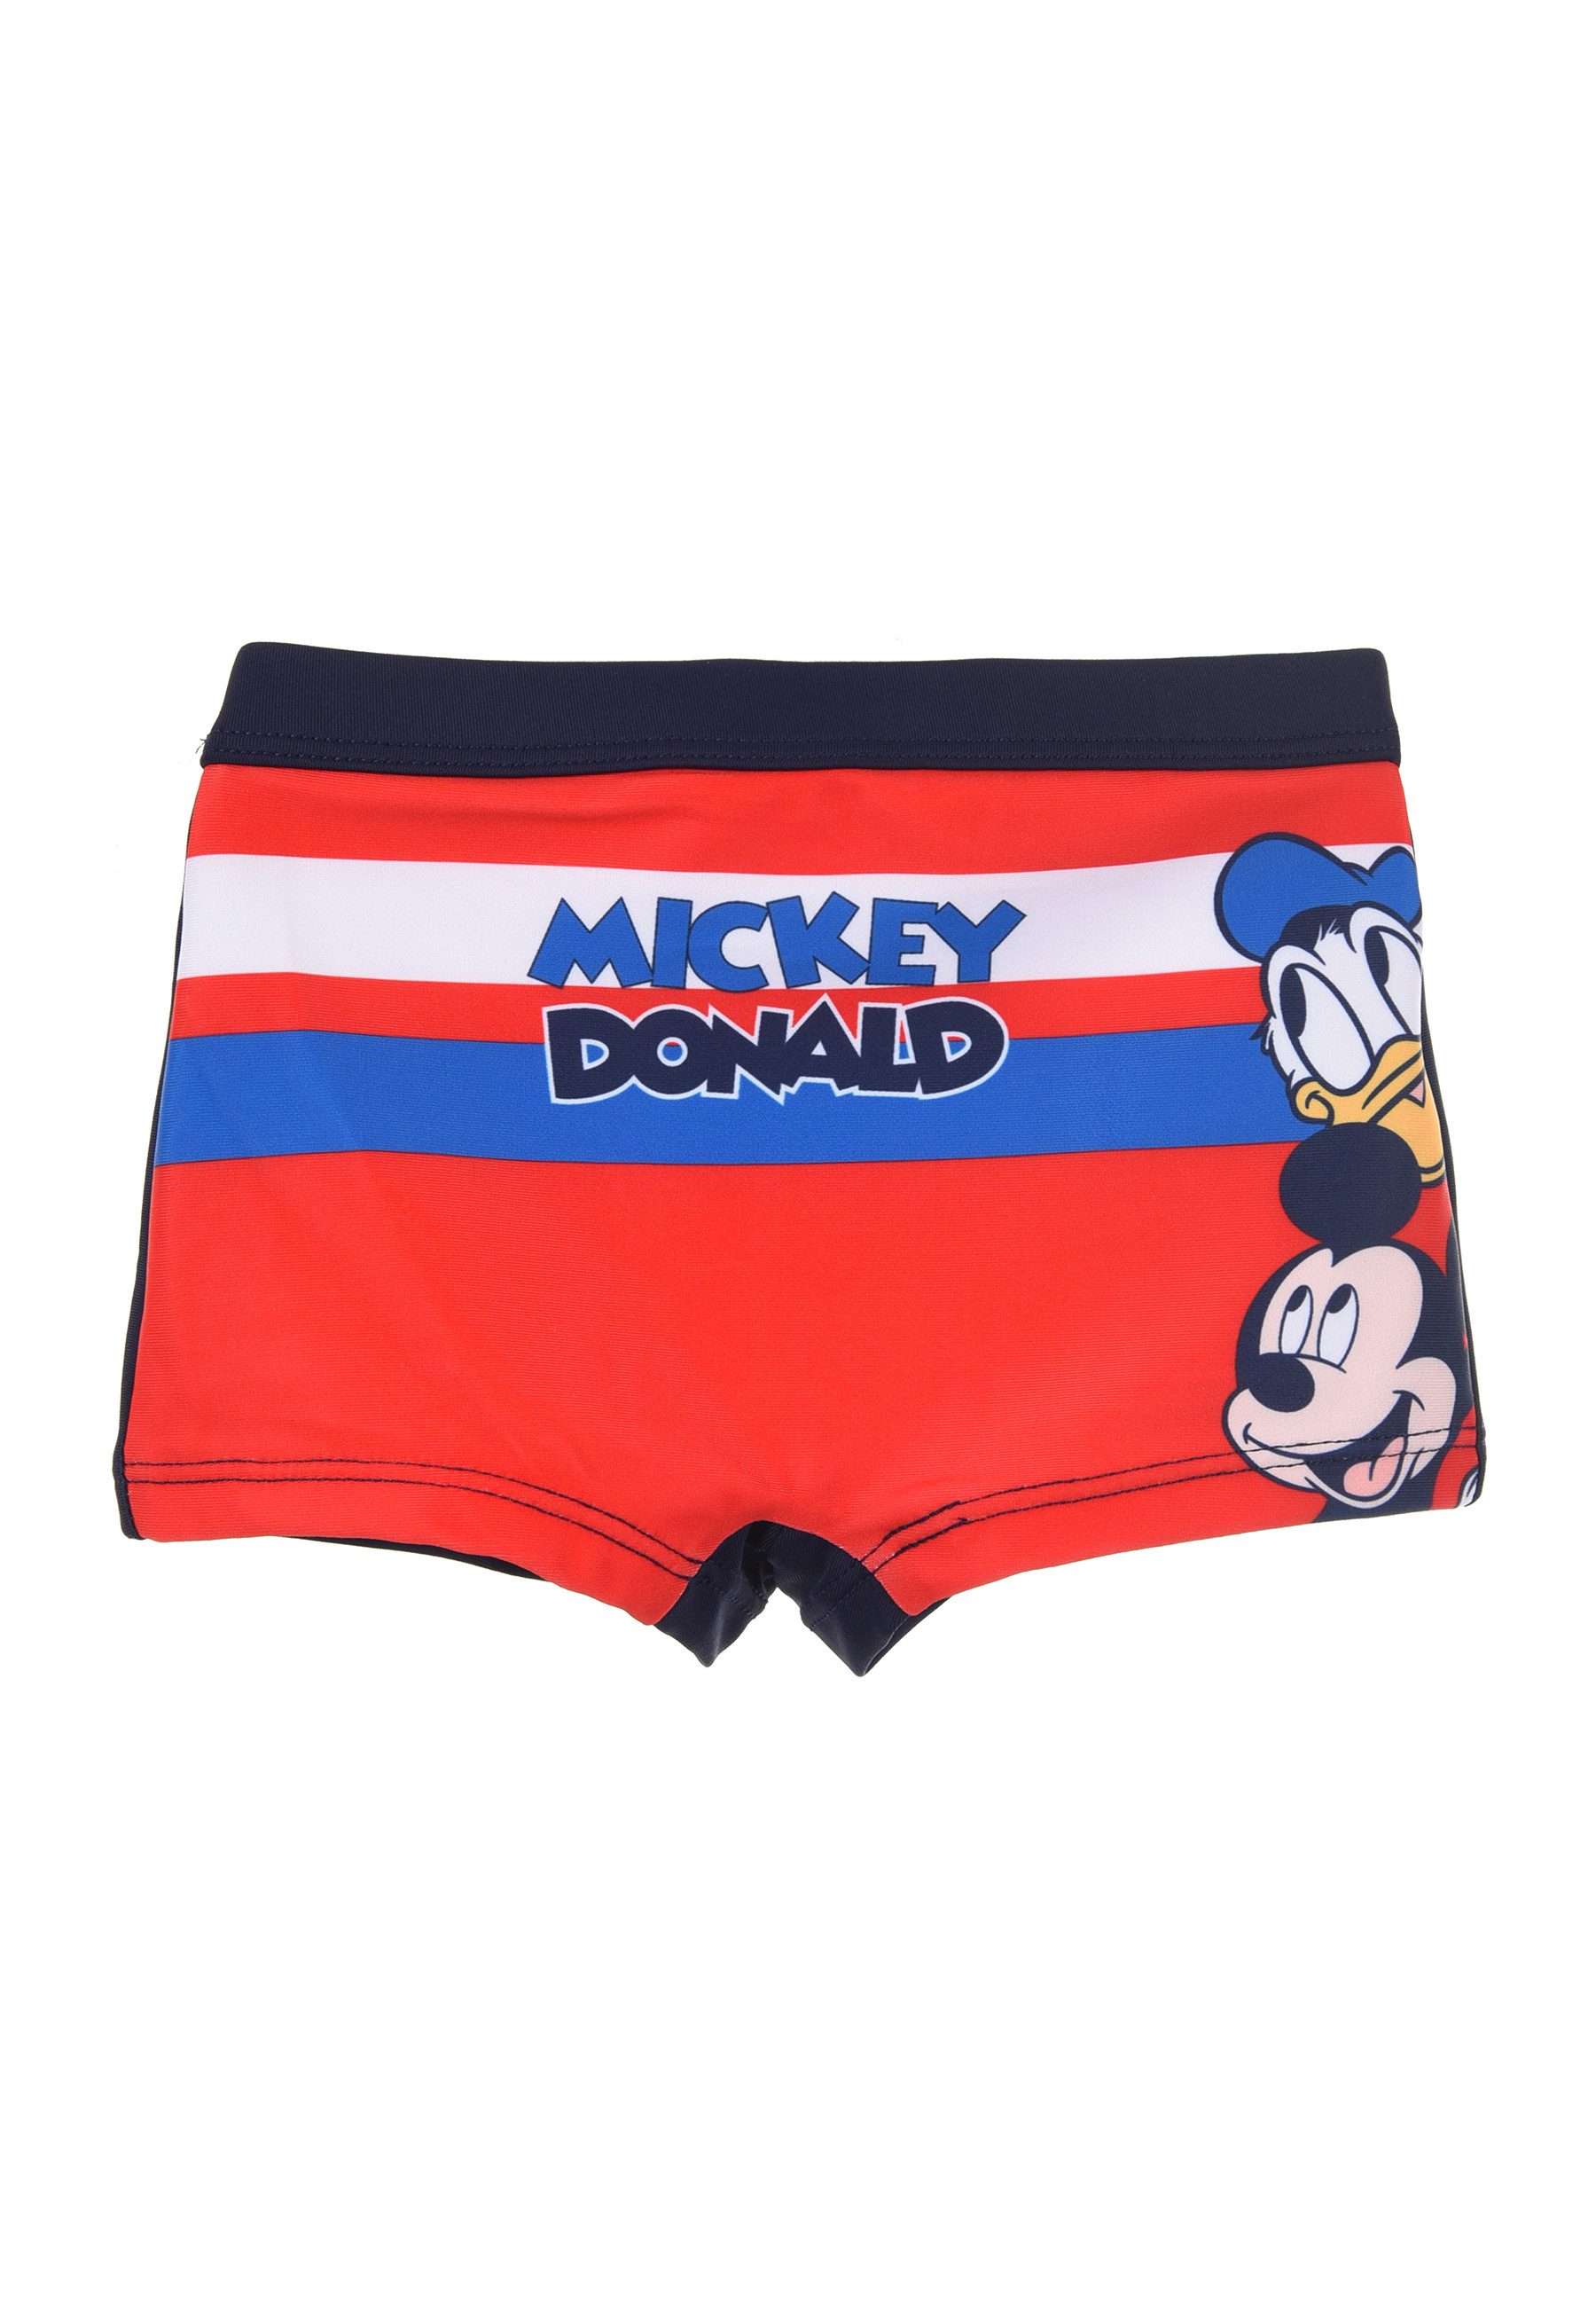 Disney Mickey Mouse Badehose Schwimmhose Jungen Baby